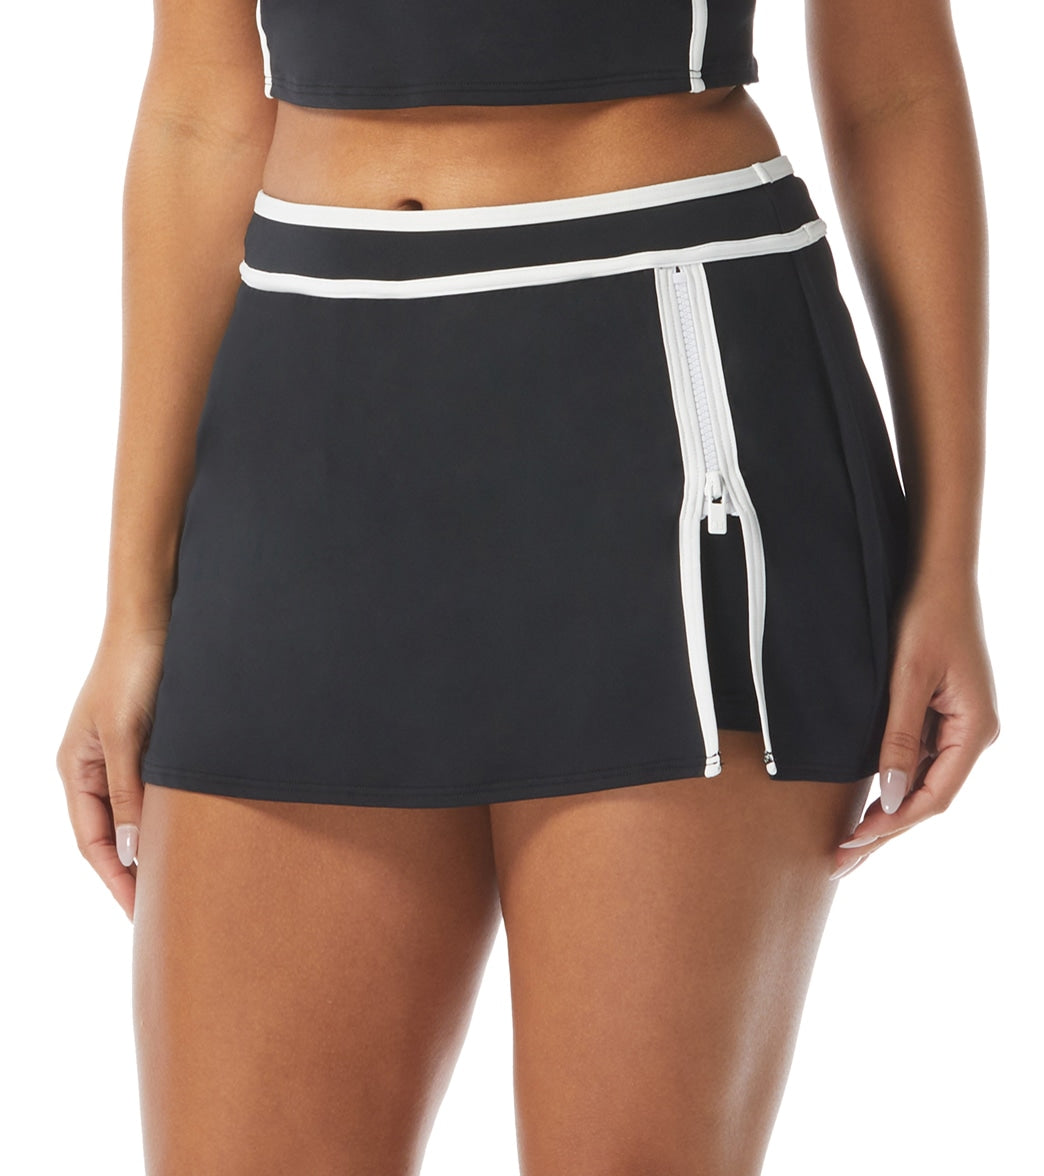 Beach House Womens Piping Solid Excel Swim Skort